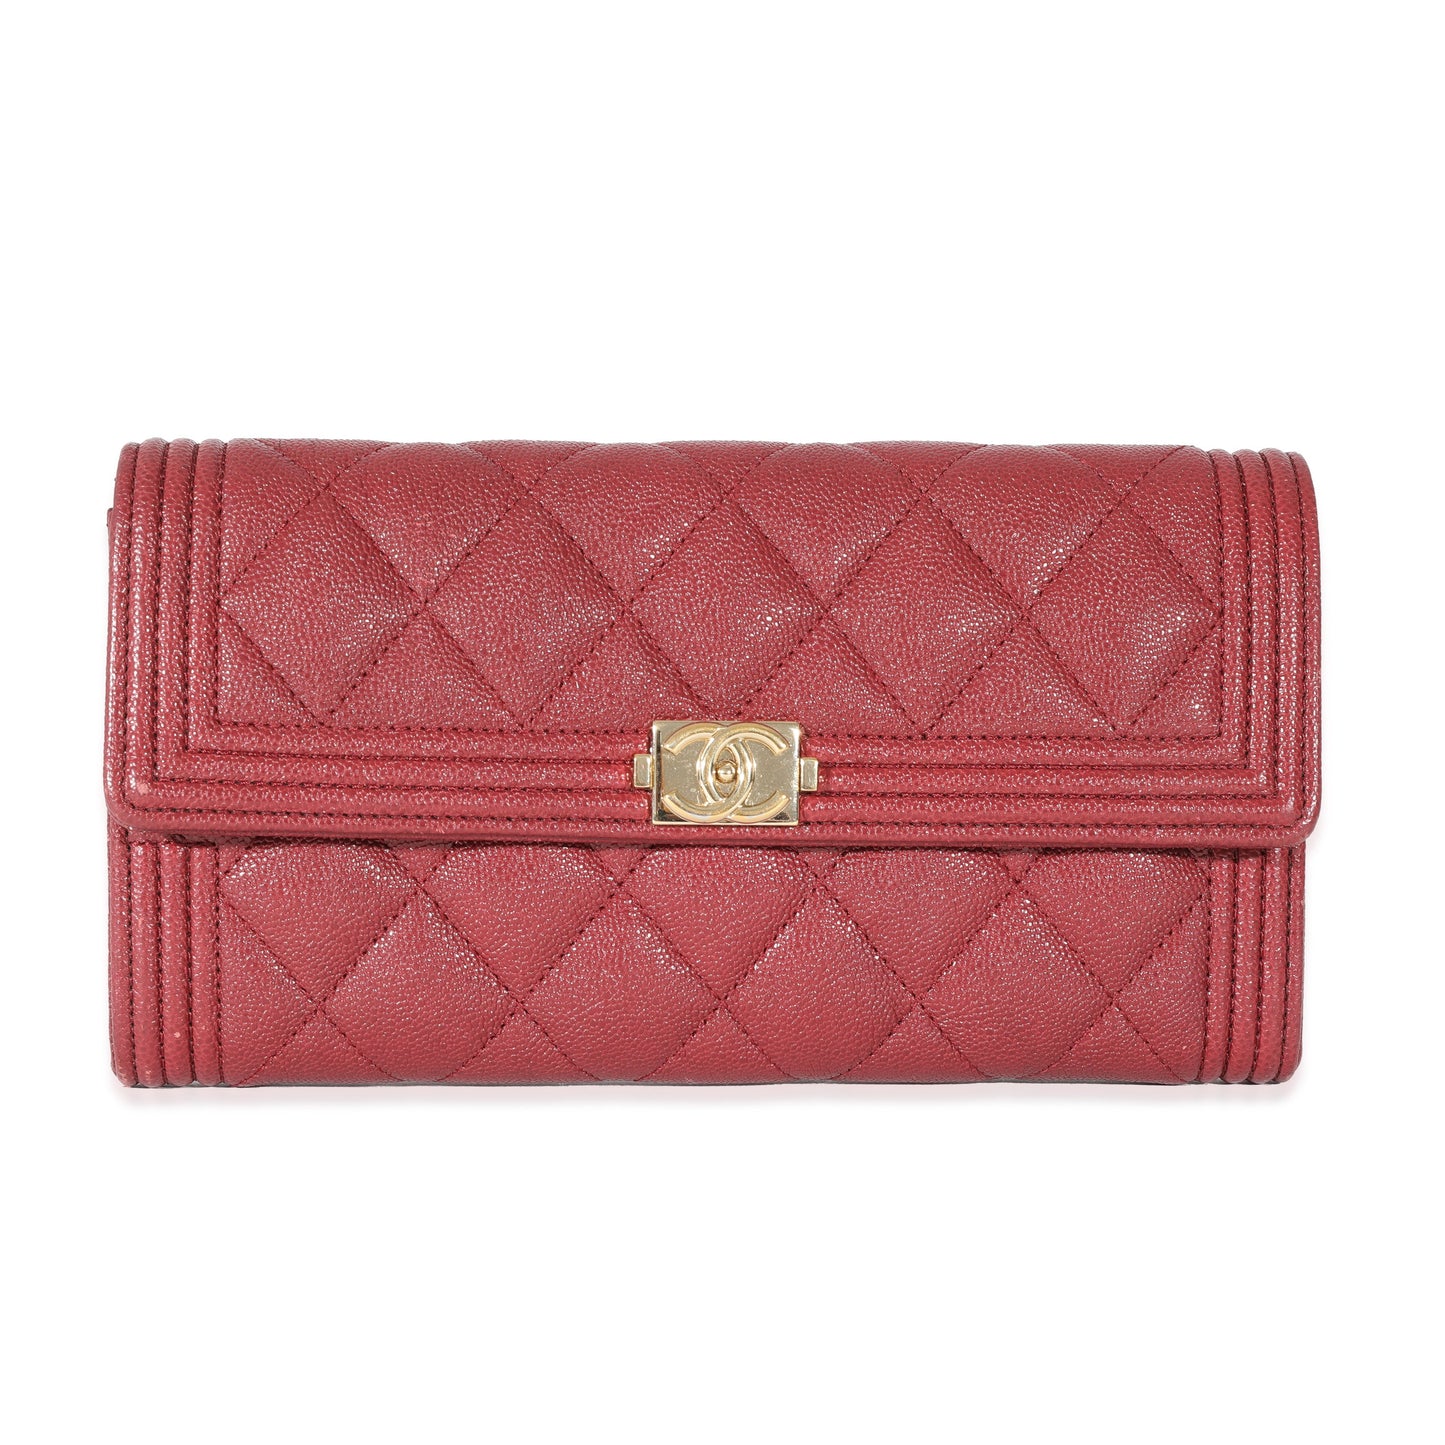 CHANEL - Burgundy Quilted Caviar Boy Flap Wallet